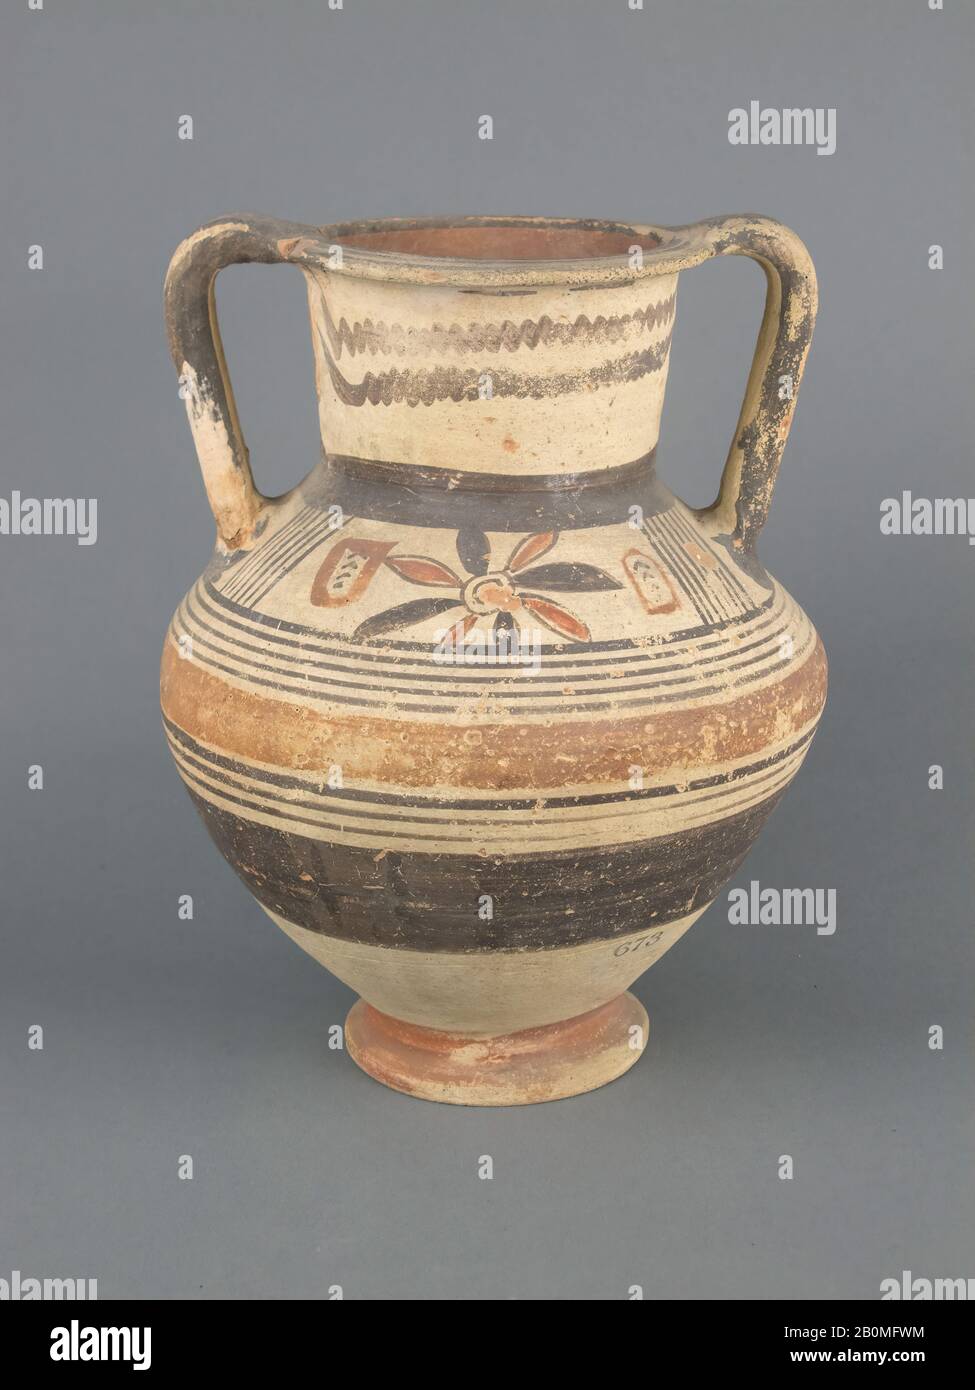 Amphora, Cypriot, Cypro-Archaic I, Date 750–480 B.C., Cypriot, Terracotta, H. 10 in. (25.4 cm), Vases Stock Photo